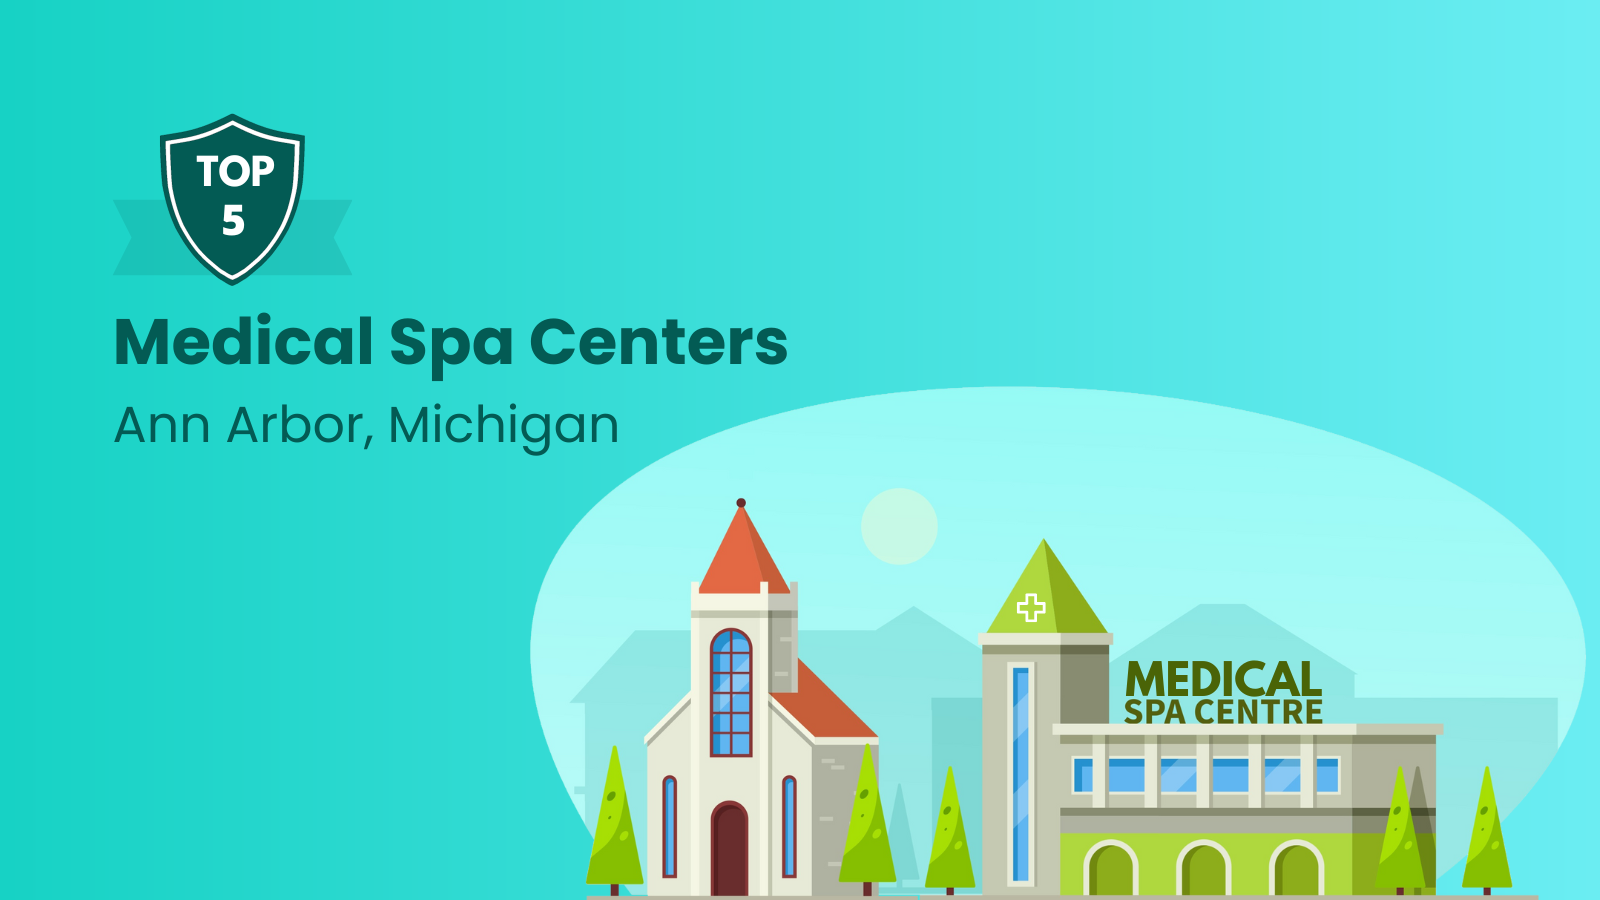 5 Top Rated Medical Spa Centers in Ann Arbor, Michigan